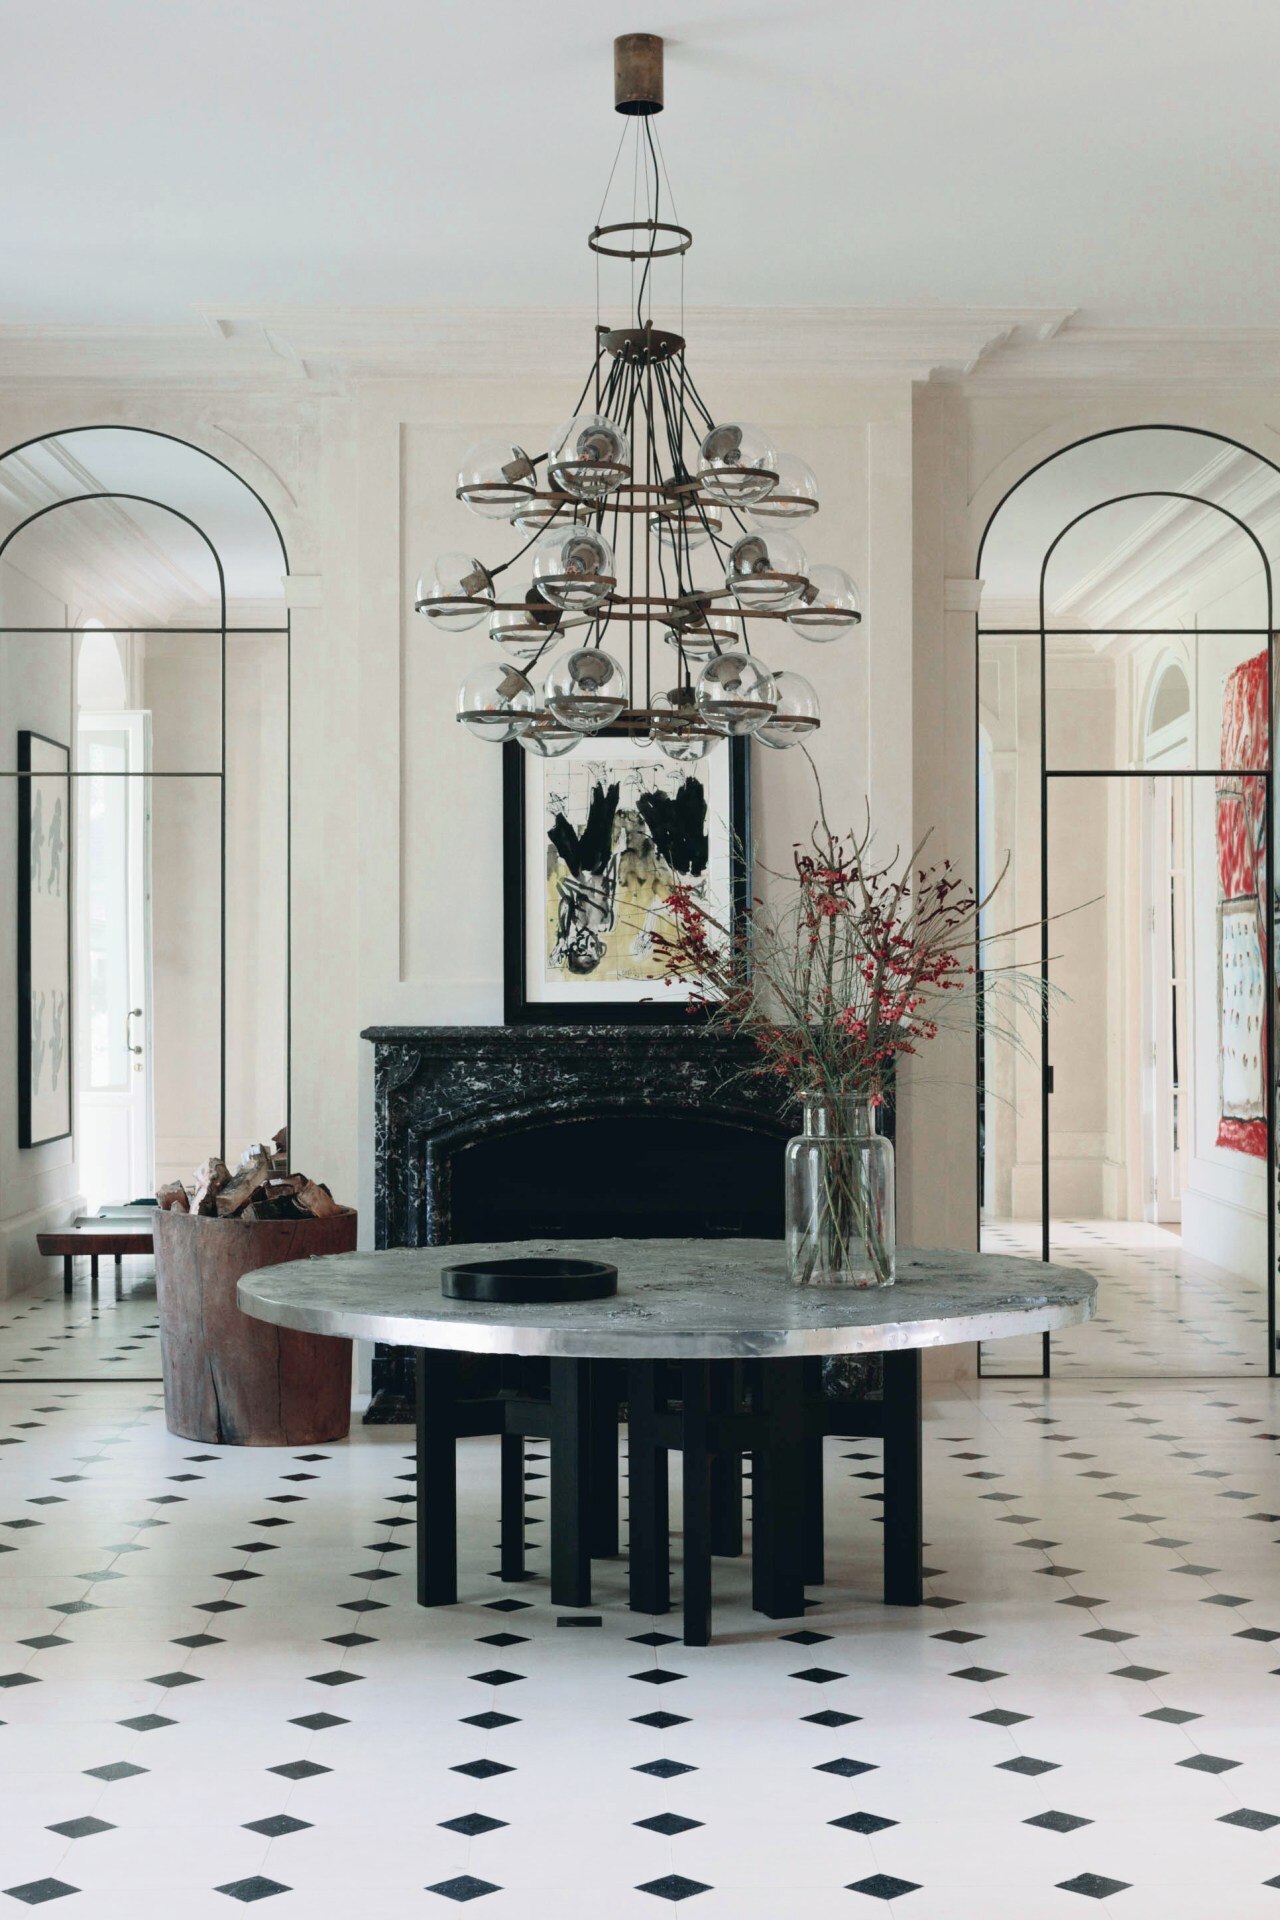 Architect Nathan Litera Designs 18th Century Chateau in Brussels - Vogue  Australia